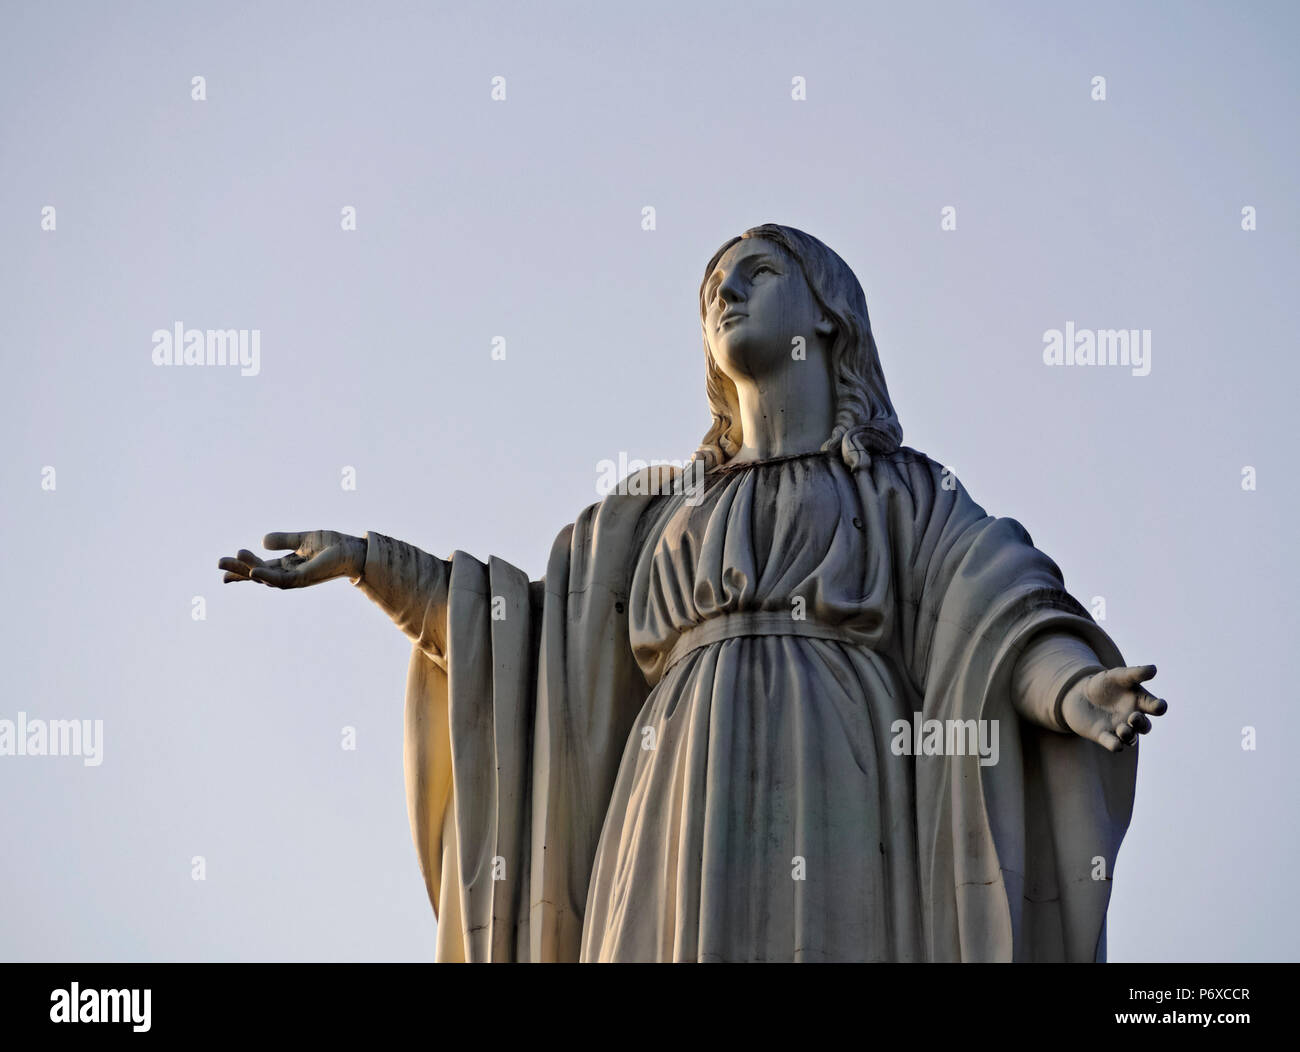 Chile, Santiago, Statue of the Virgin Mary on the top of the San Cristobal Hill. Stock Photo